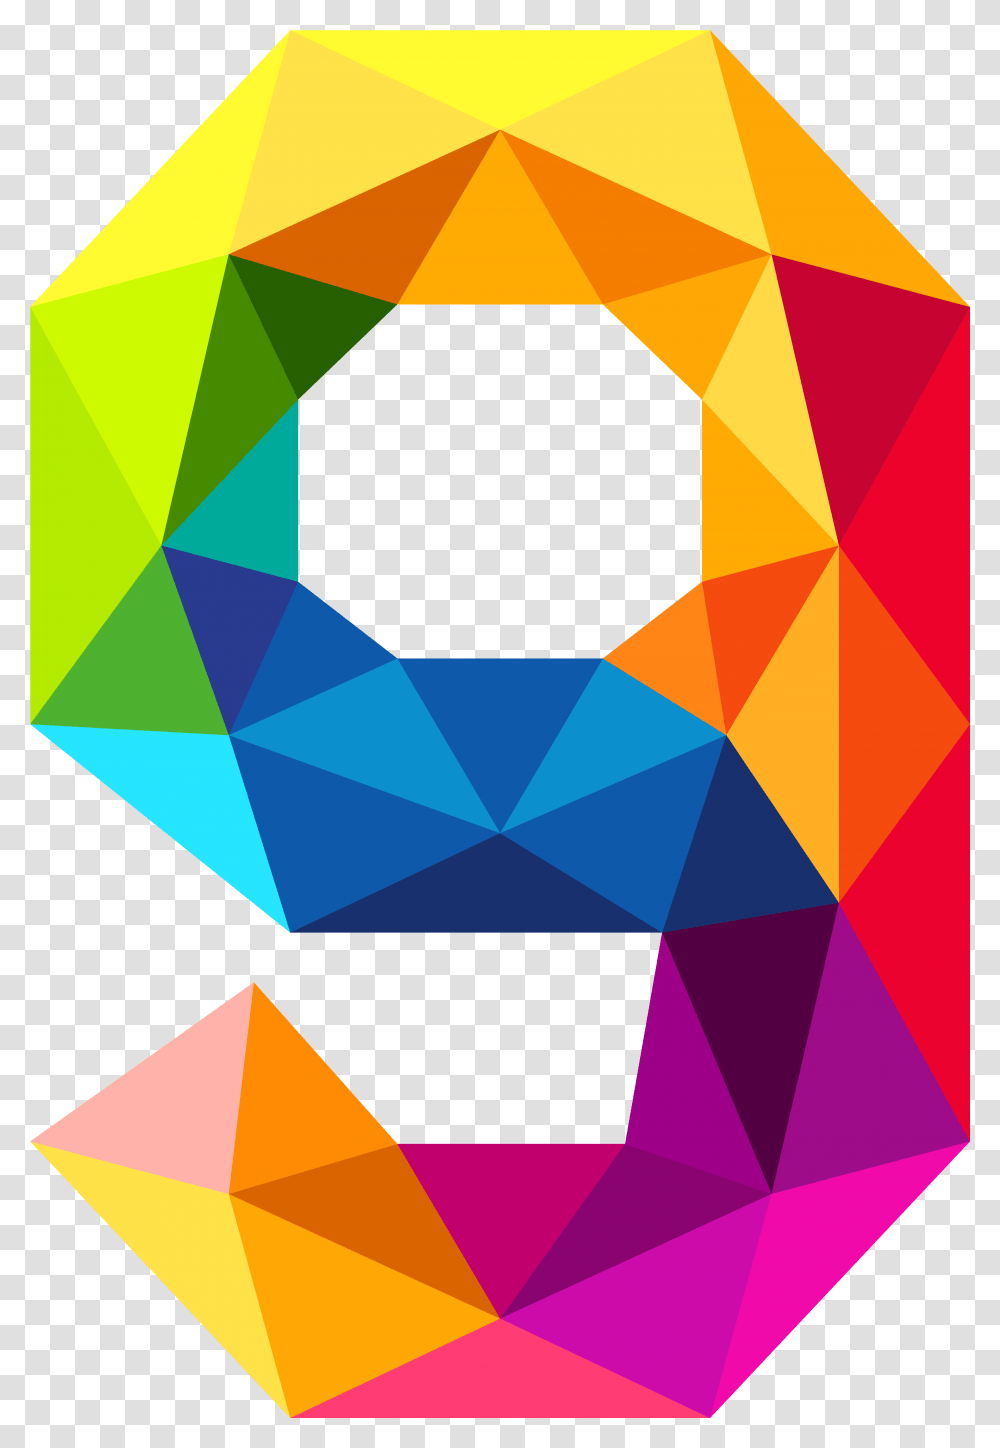 Triangle Clip Design Number 9 No Background, Sphere, Gemstone, Jewelry, Accessories Transparent Png